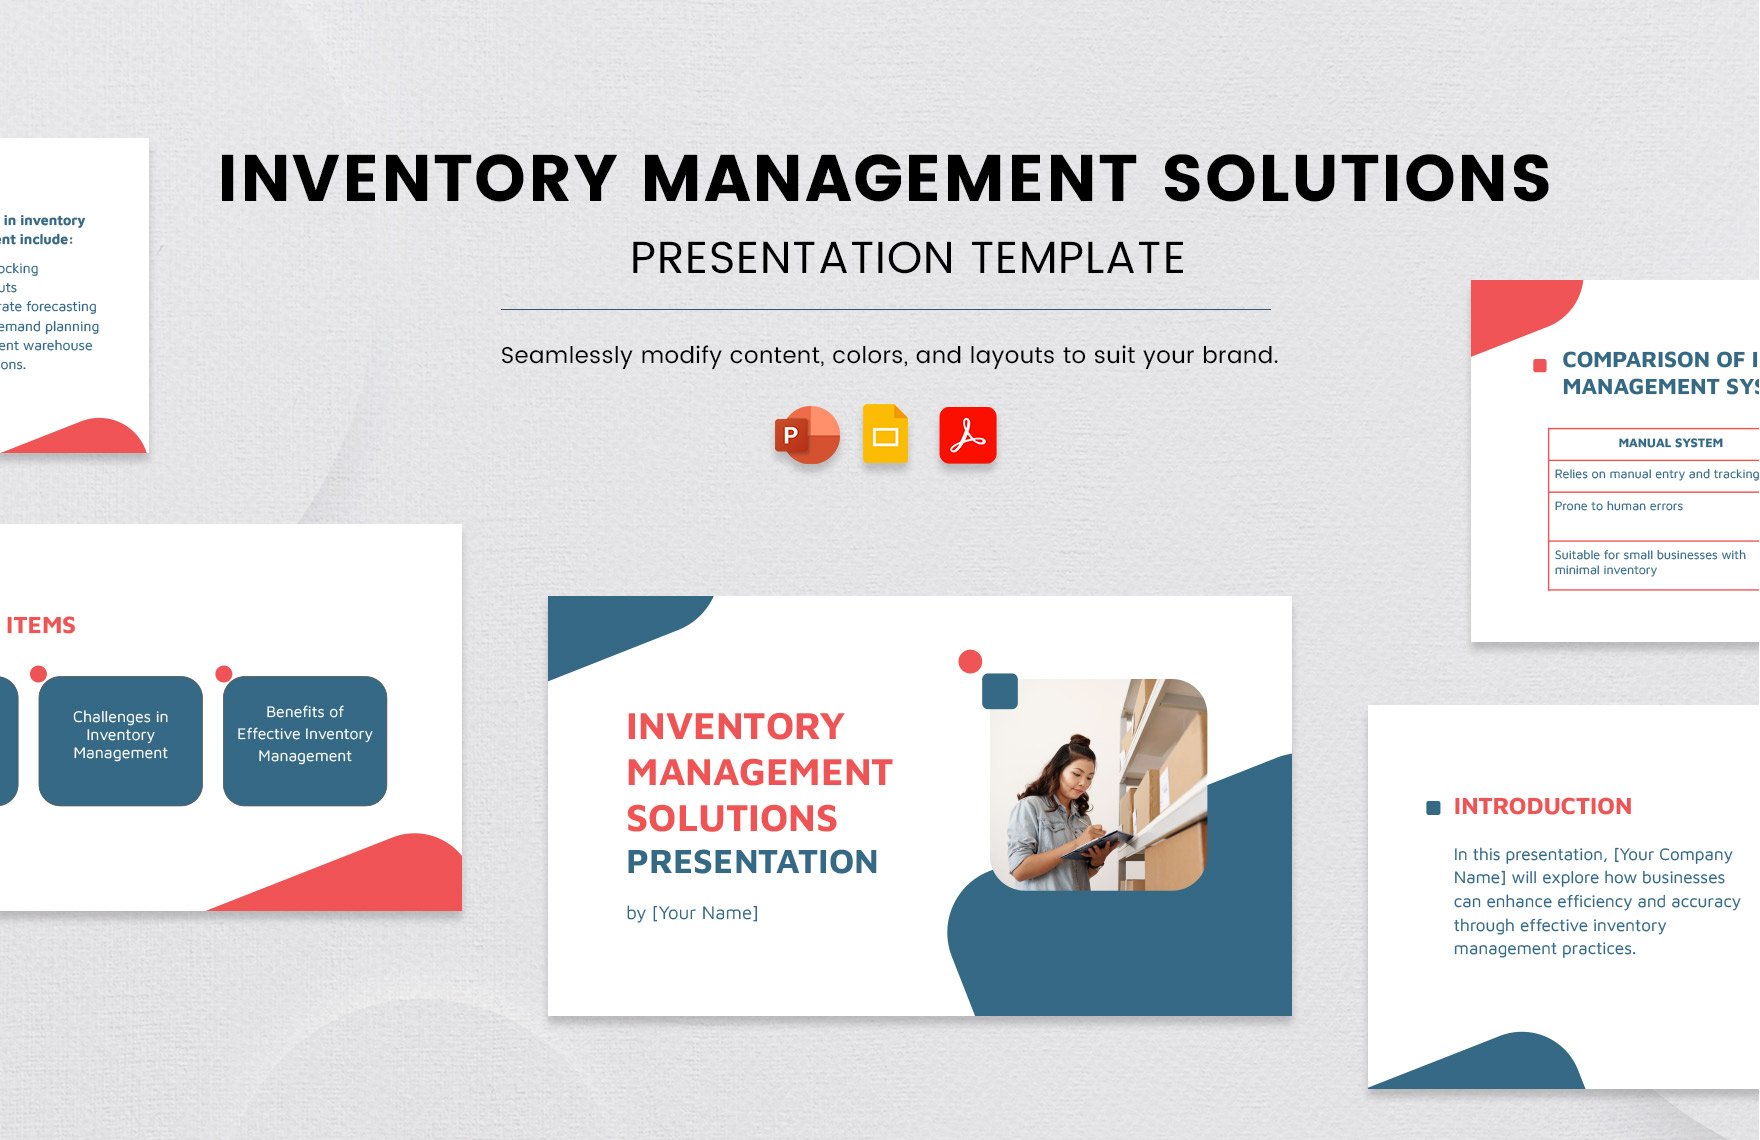 Free Inventory Management Solutions Presentation Template in PDF, PowerPoint, Google Slides